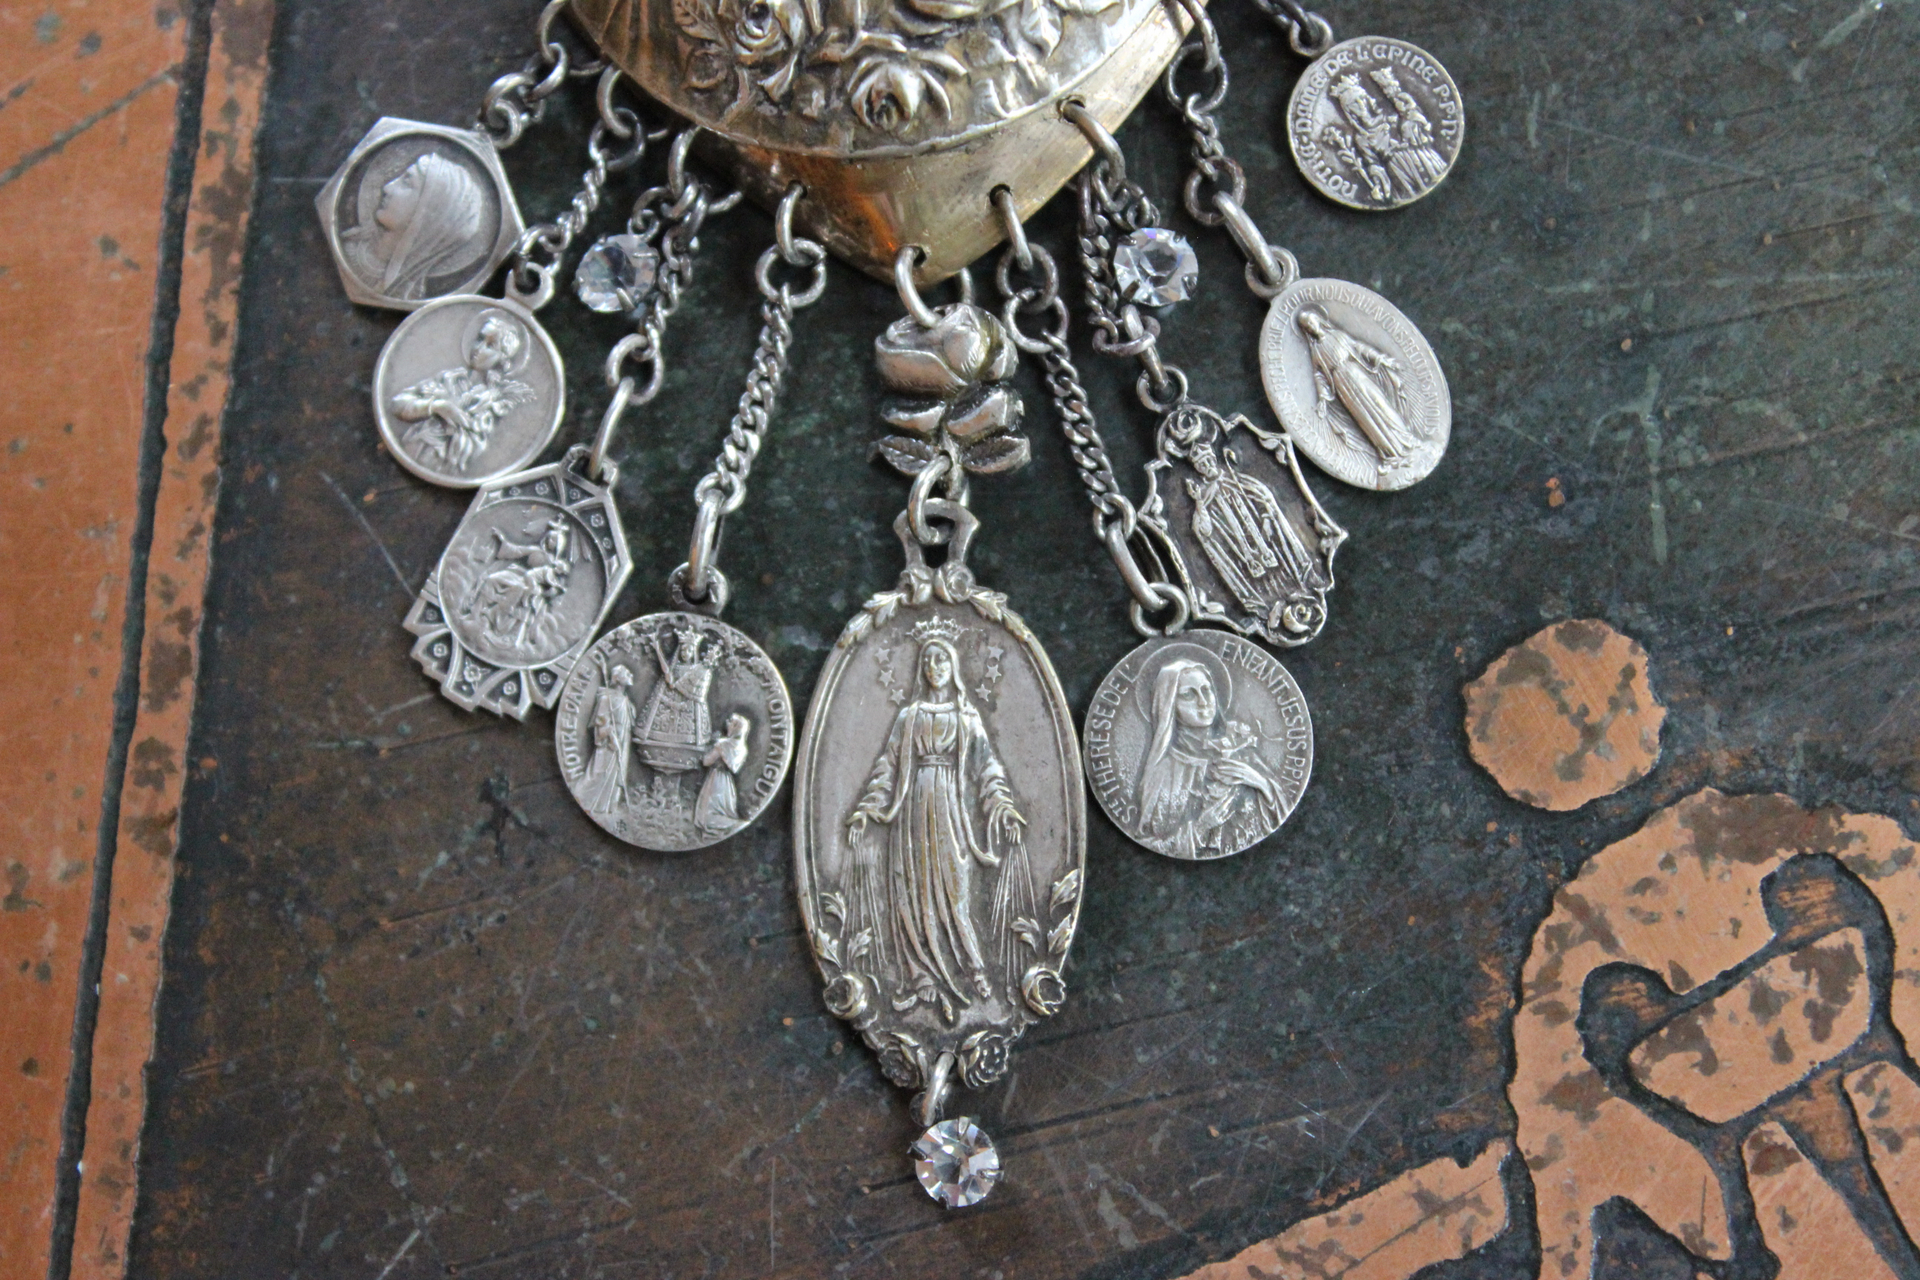 Heart of St. Therese Necklace with Antique French Medals, Antique Art Deco Faceted Crystal Drops,Antique Chain